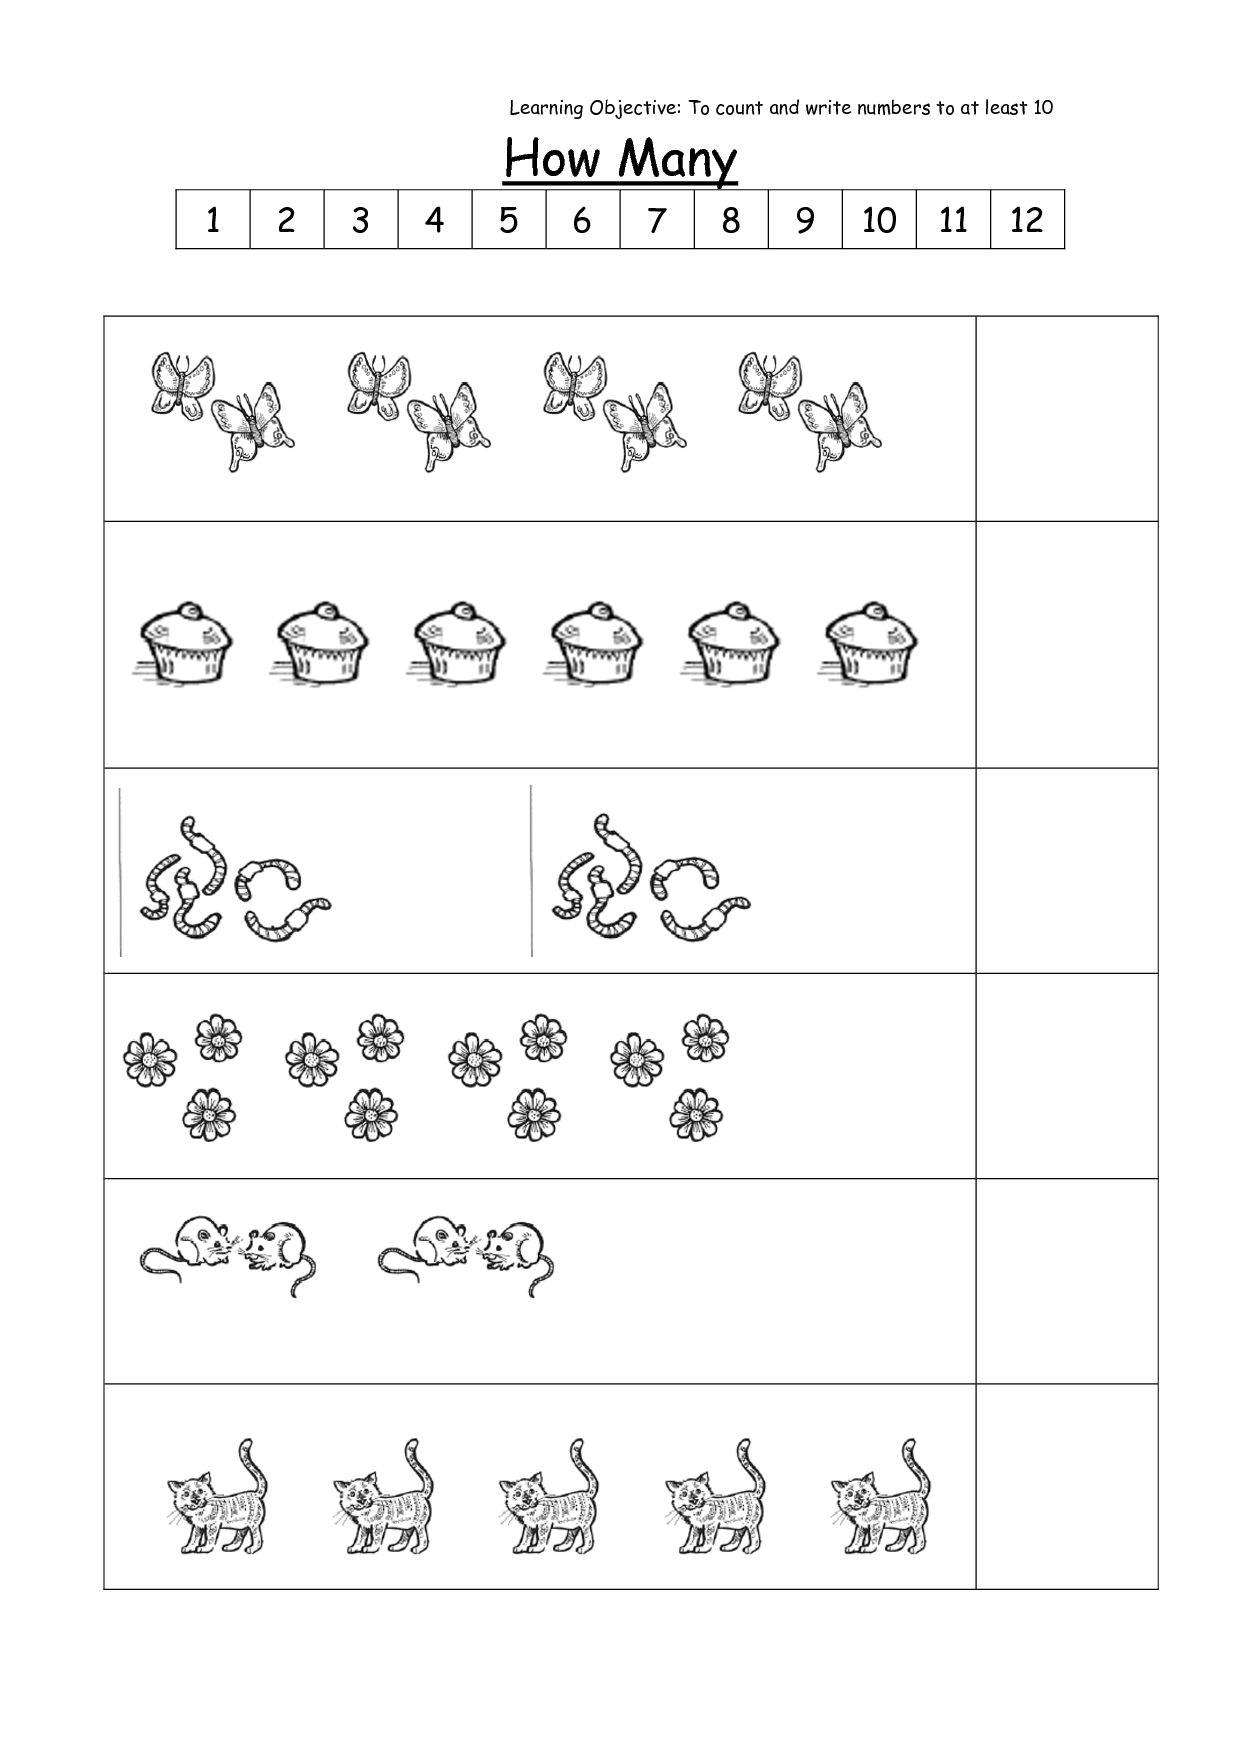 15-best-images-of-counting-numbers-11-20-worksheets-counting-objects-to-20-worksheets